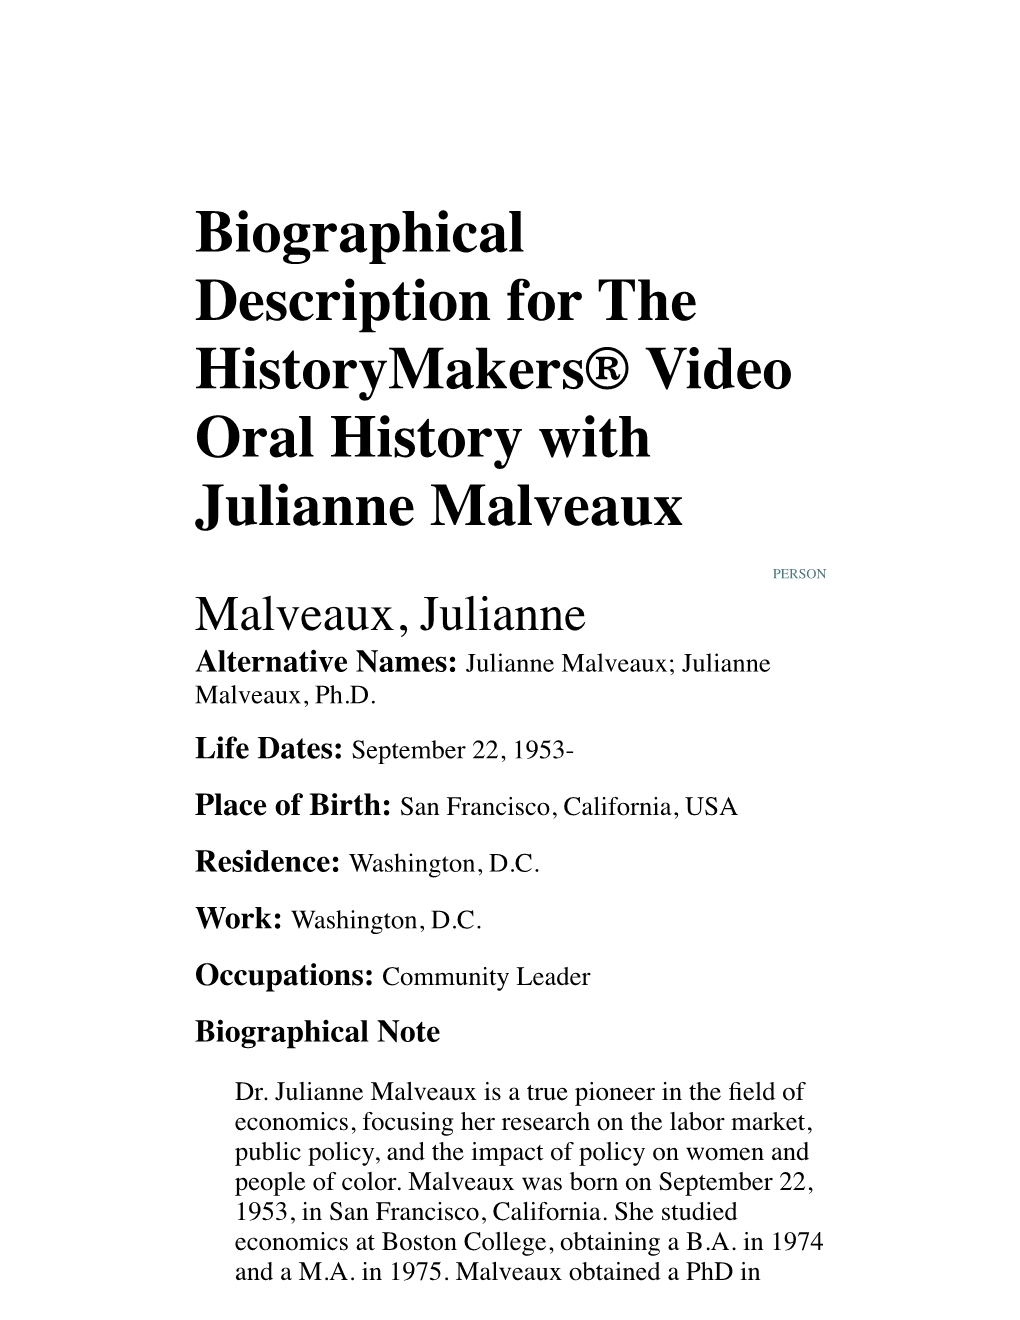 Biographical Description for the Historymakers® Video Oral History with Julianne Malveaux